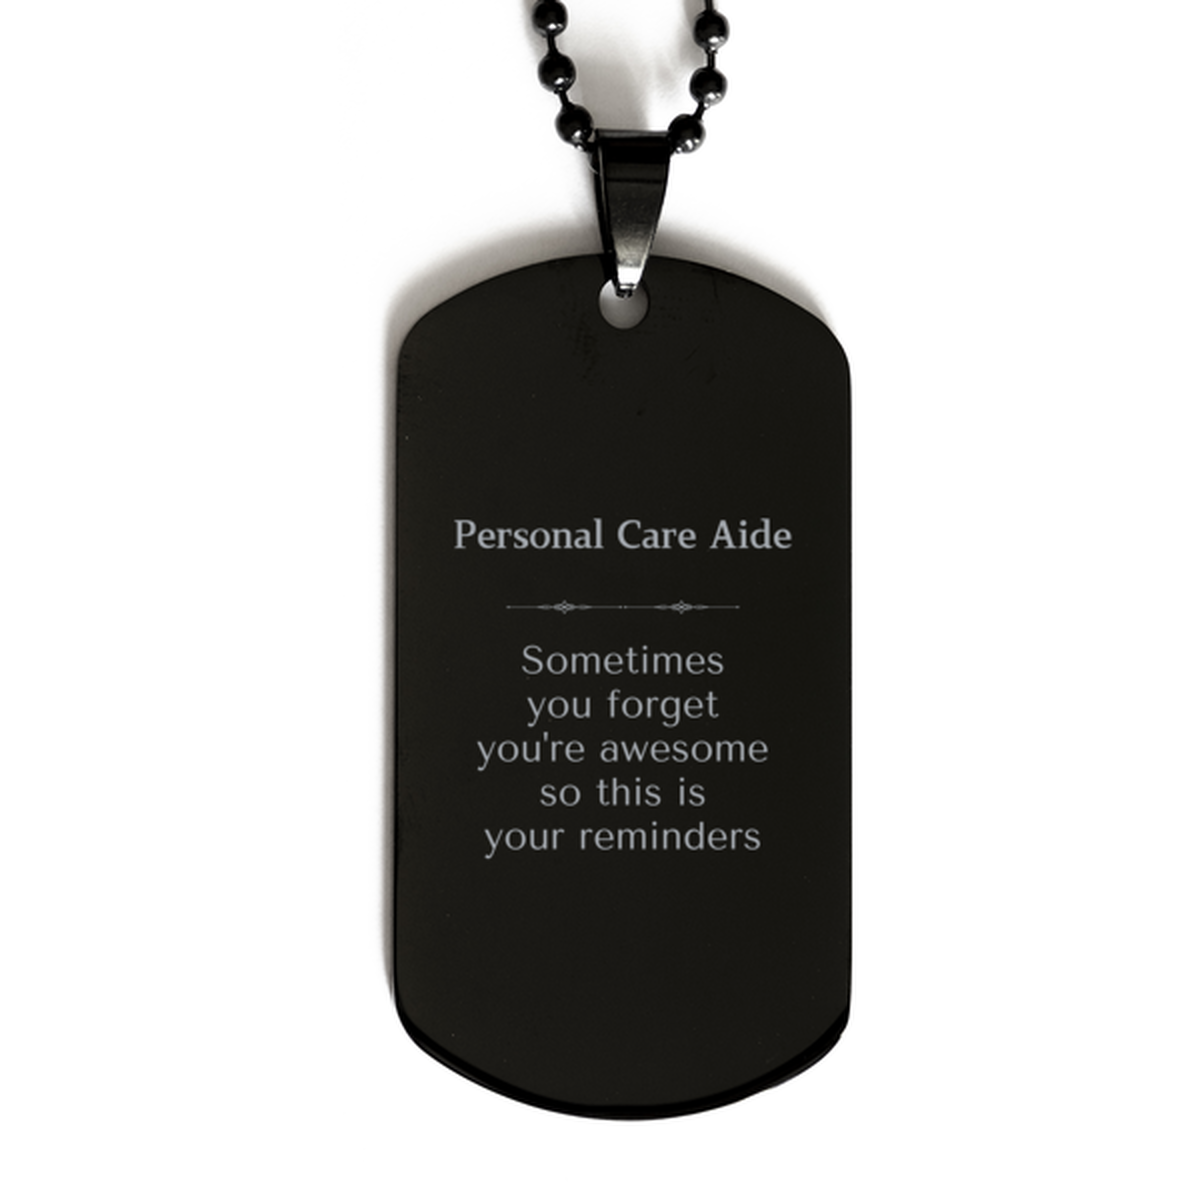 Sentimental Personal Care Aide Black Dog Tag, Personal Care Aide Sometimes you forget you're awesome so this is your reminders, Graduation Christmas Birthday Gifts for Personal Care Aide, Men, Women, Coworkers